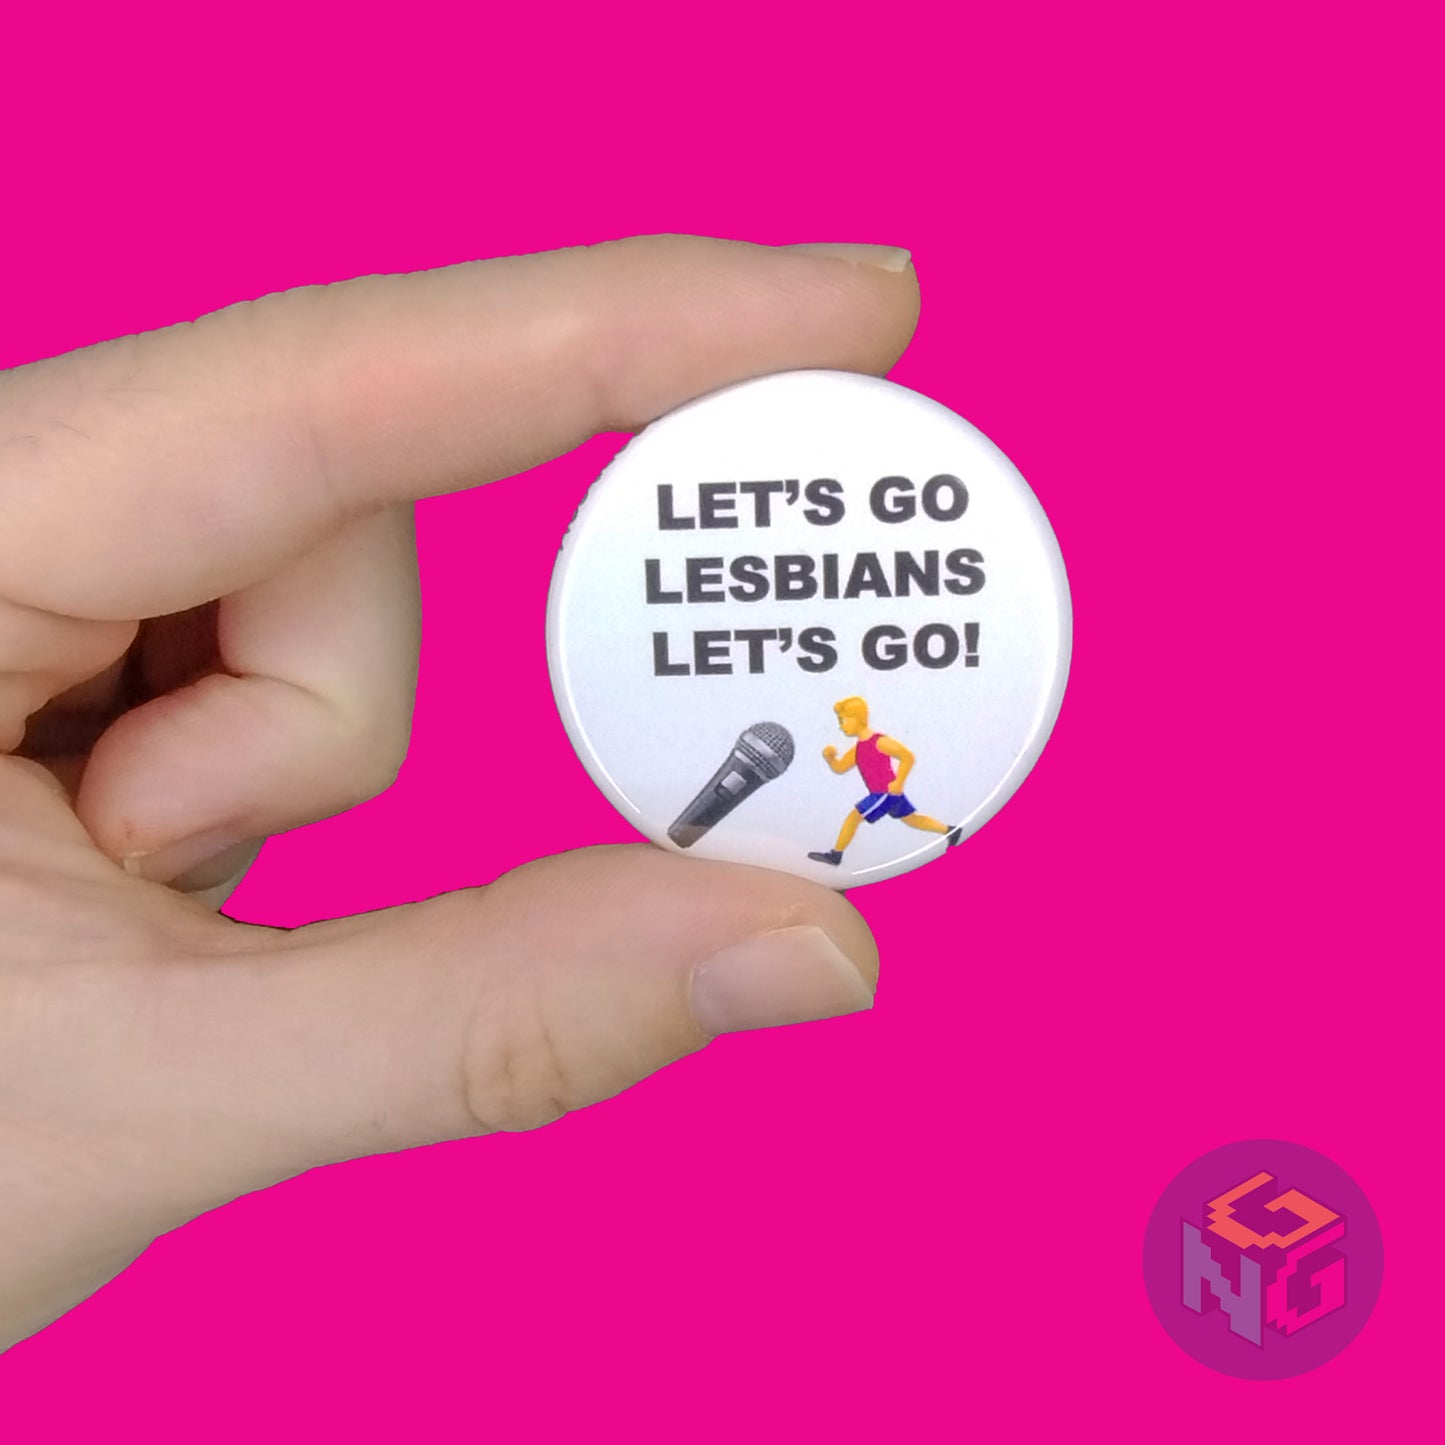 light skin hand holding the round white let's go lesbians pin in front of a pink background